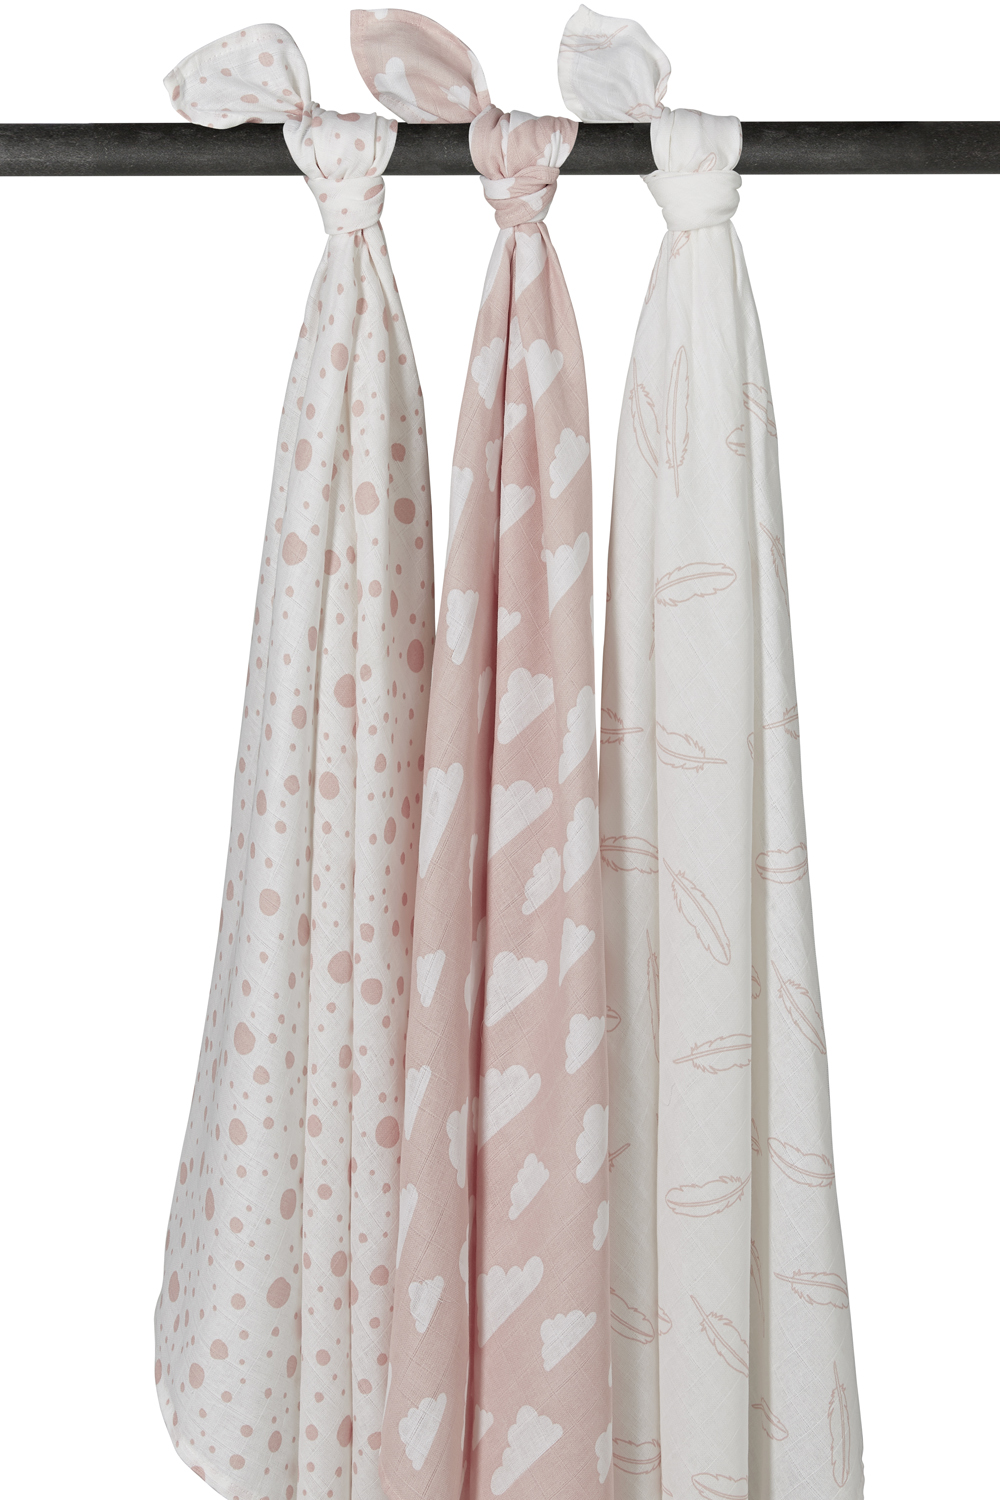 Muslin Swaddles 3-Pack Feathers-Clouds-Dots - Pink/White - 120X120cm